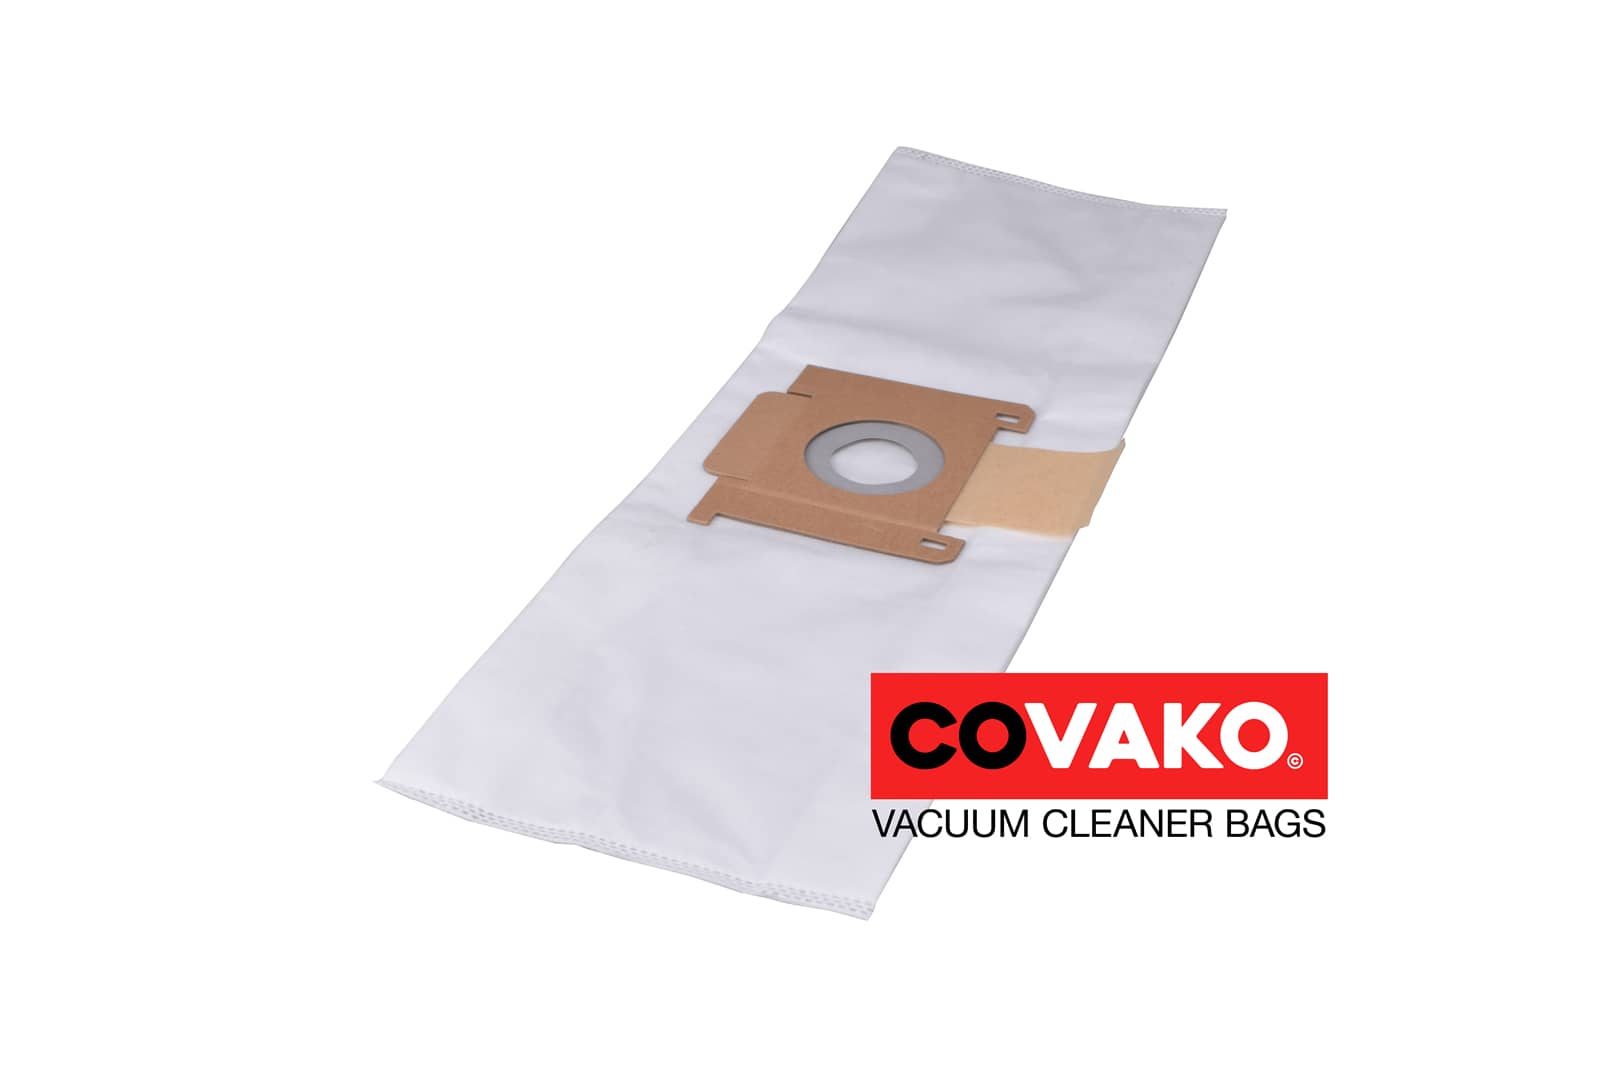 Lorito Steady Extra 6.0 / Synthesis - Lorito vacuum cleaner bags